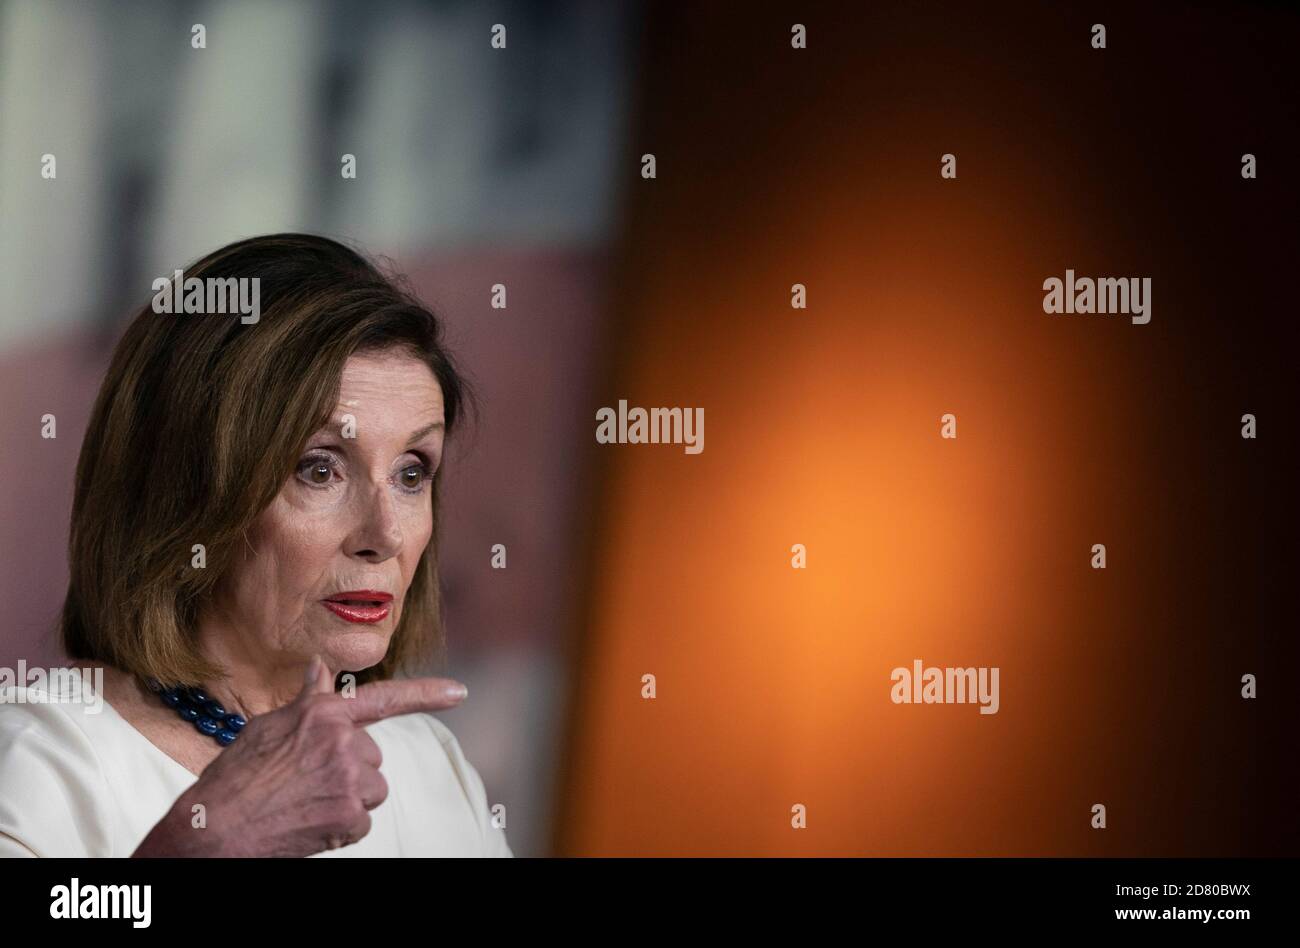 U.S. House Speaker Nancy Pelosi, a Democrat from California, speaks to members of the media during her weekly news conference in Washington, D.C., U.S., on Thursday, Sept. 26, 2019. Pelosi reiterated the reasons why House Democrats have begun the impeachment process against President Donald Trump. Credit: Alex Edelman/The Photo Access Stock Photo